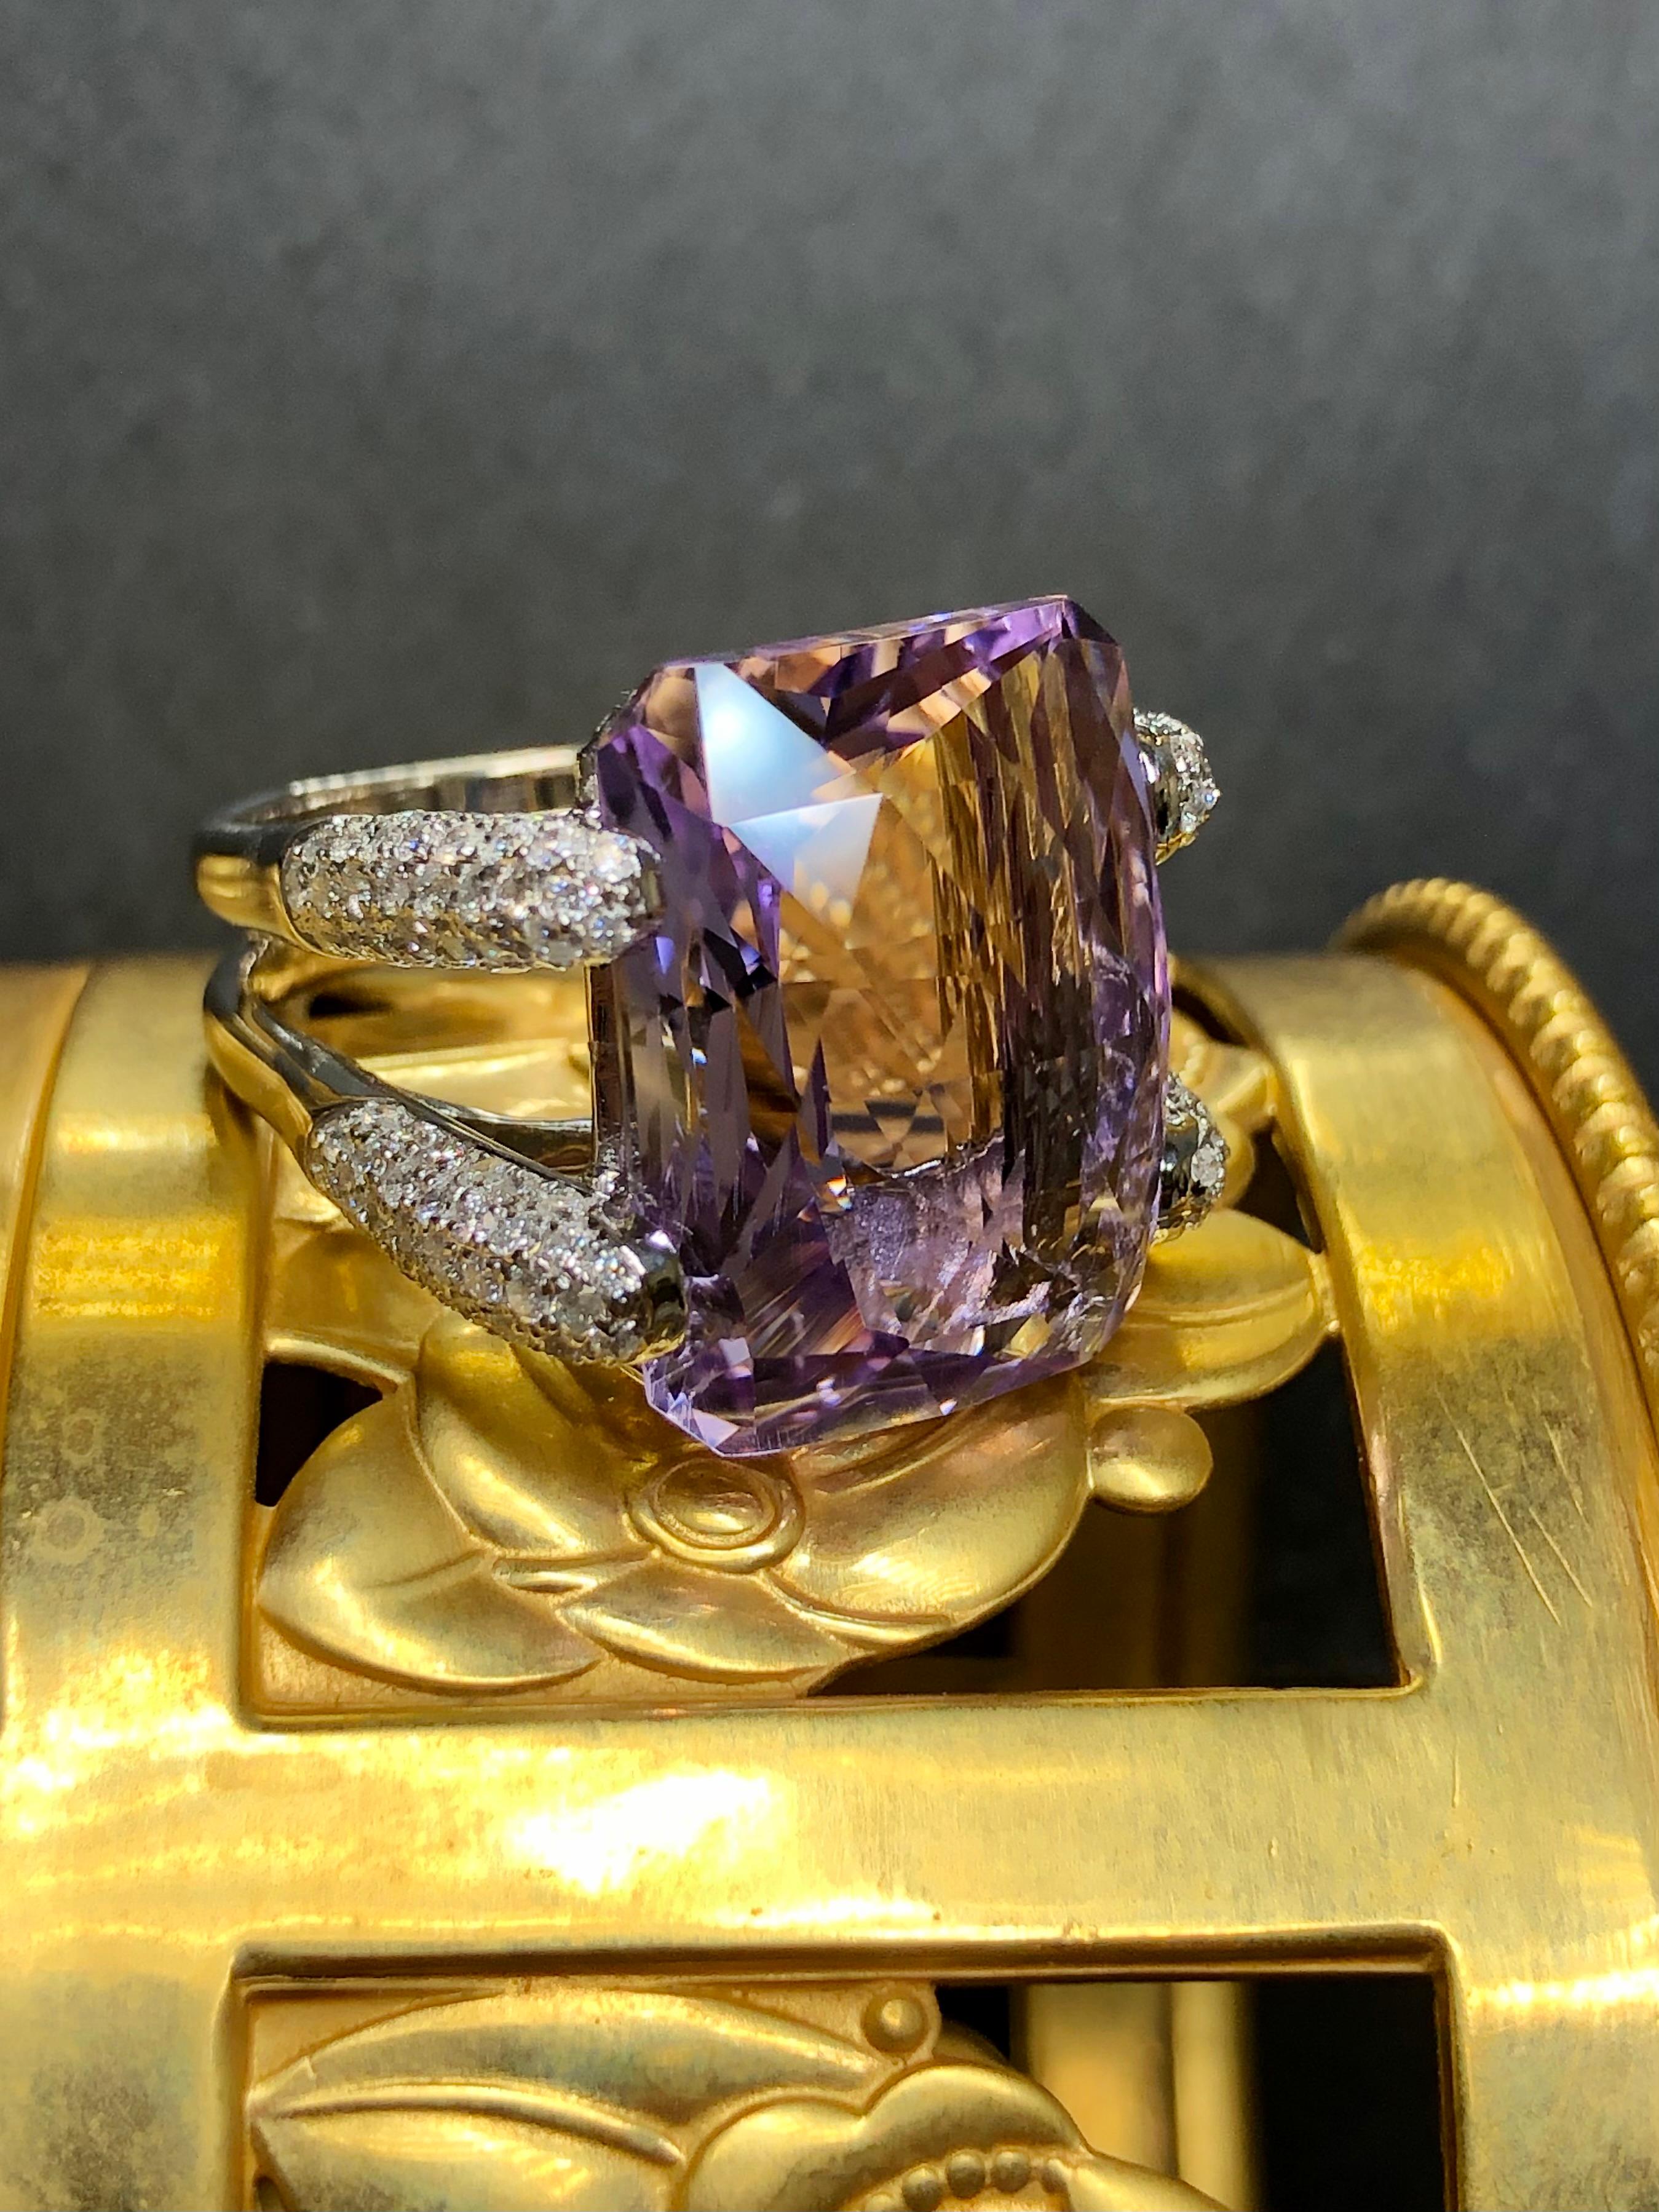 
Not all amethyst rings are created equal… obviously. Crafted in 18K white gold, this ring is centered by an approximately 21ct fantasy cut amenthyst which is surrounded by approximately 1.84cttw in pavé set H-I color Si1-i1 clarity round diamonds.